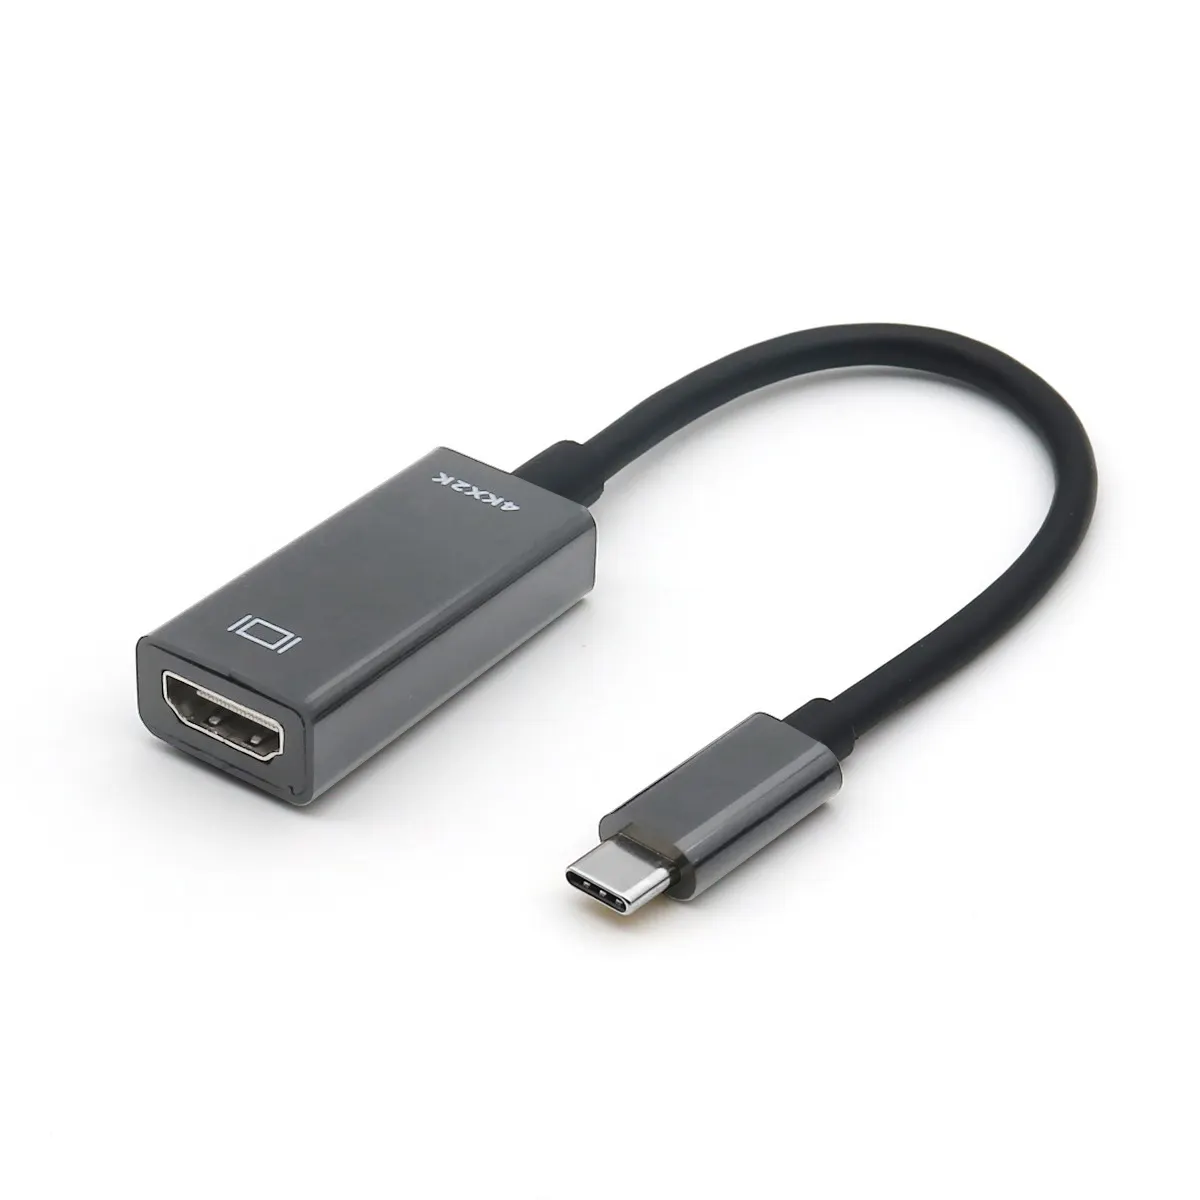 2023 OEM Latest LOGO Design Type c to HDMI Converter Cable support 4K 30HZ HDMI Cable Type C for Phone PC USB C to HDMI Adapter